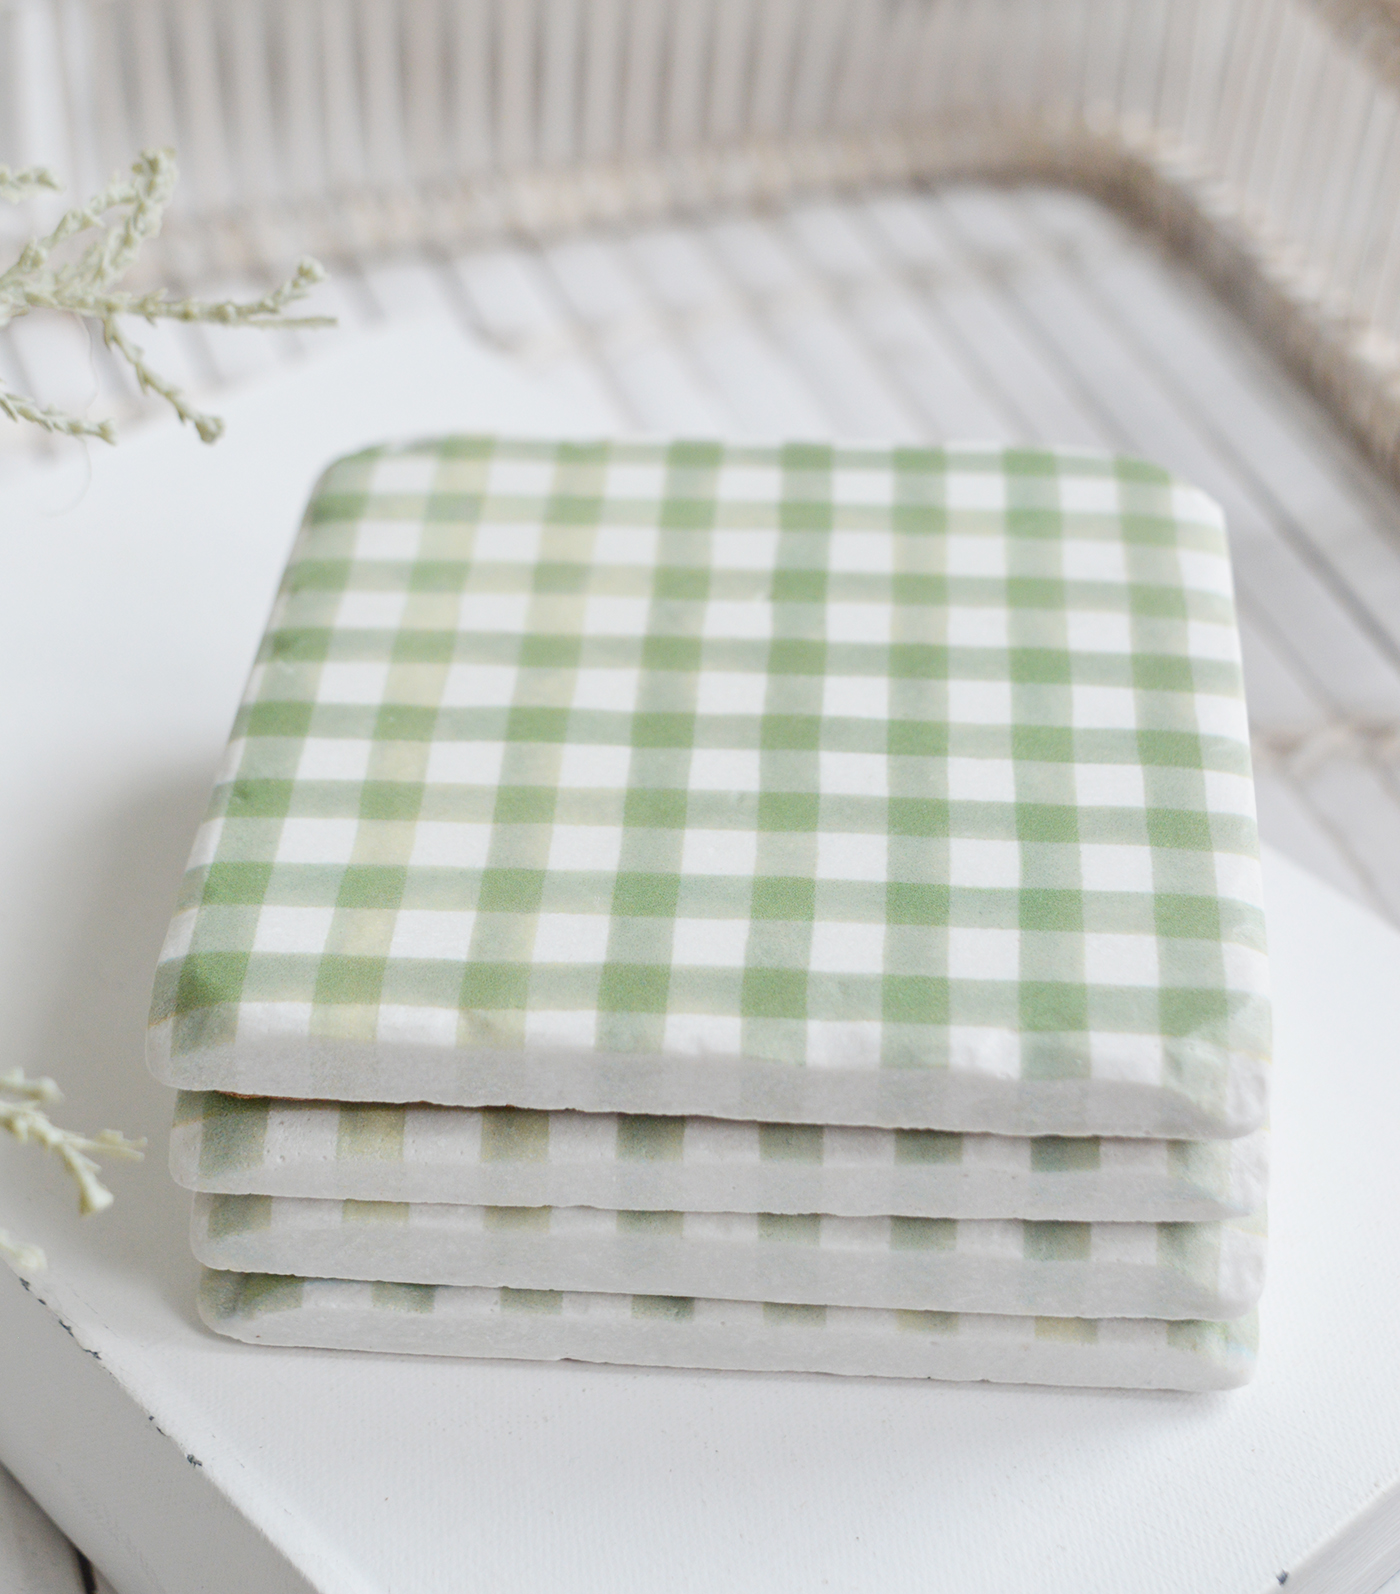 Sage green and whiteGingham coasters - New England modern farmhouse, country and coastal furniture, home decor and interiors